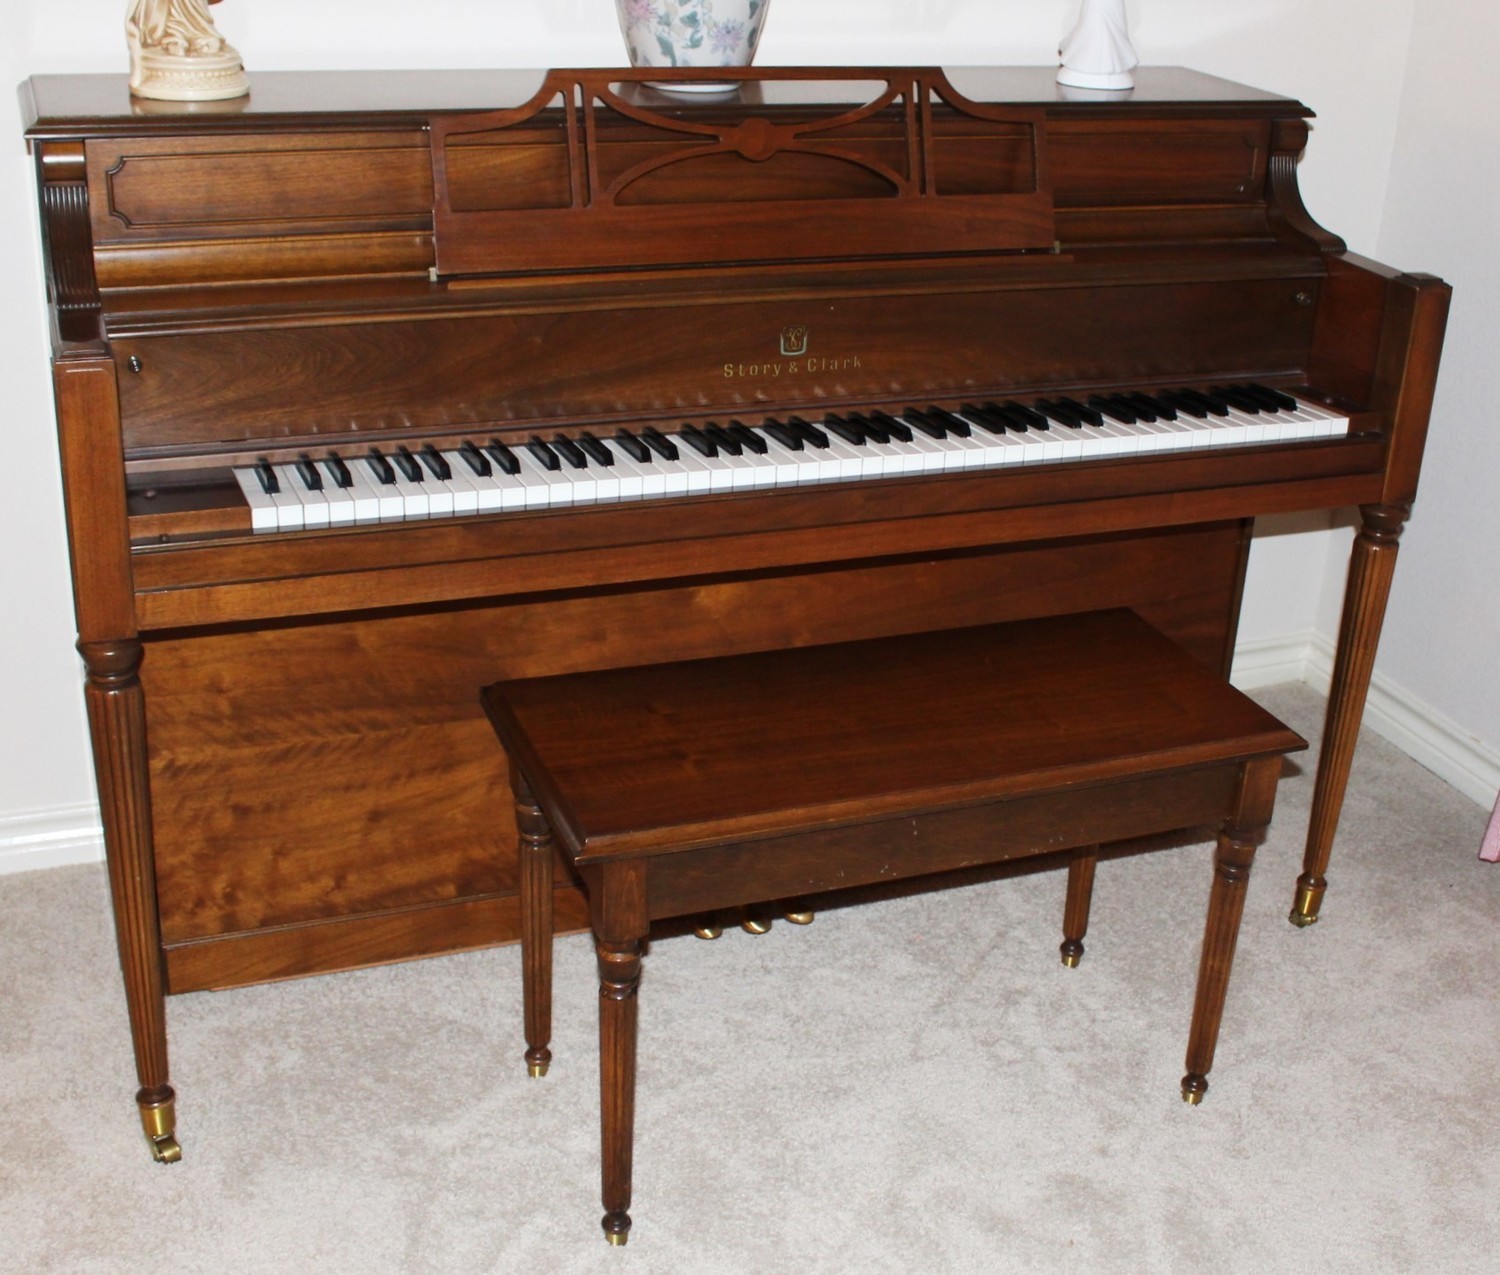 Vintage Piano Story and Clark Upright w/ Original Bench